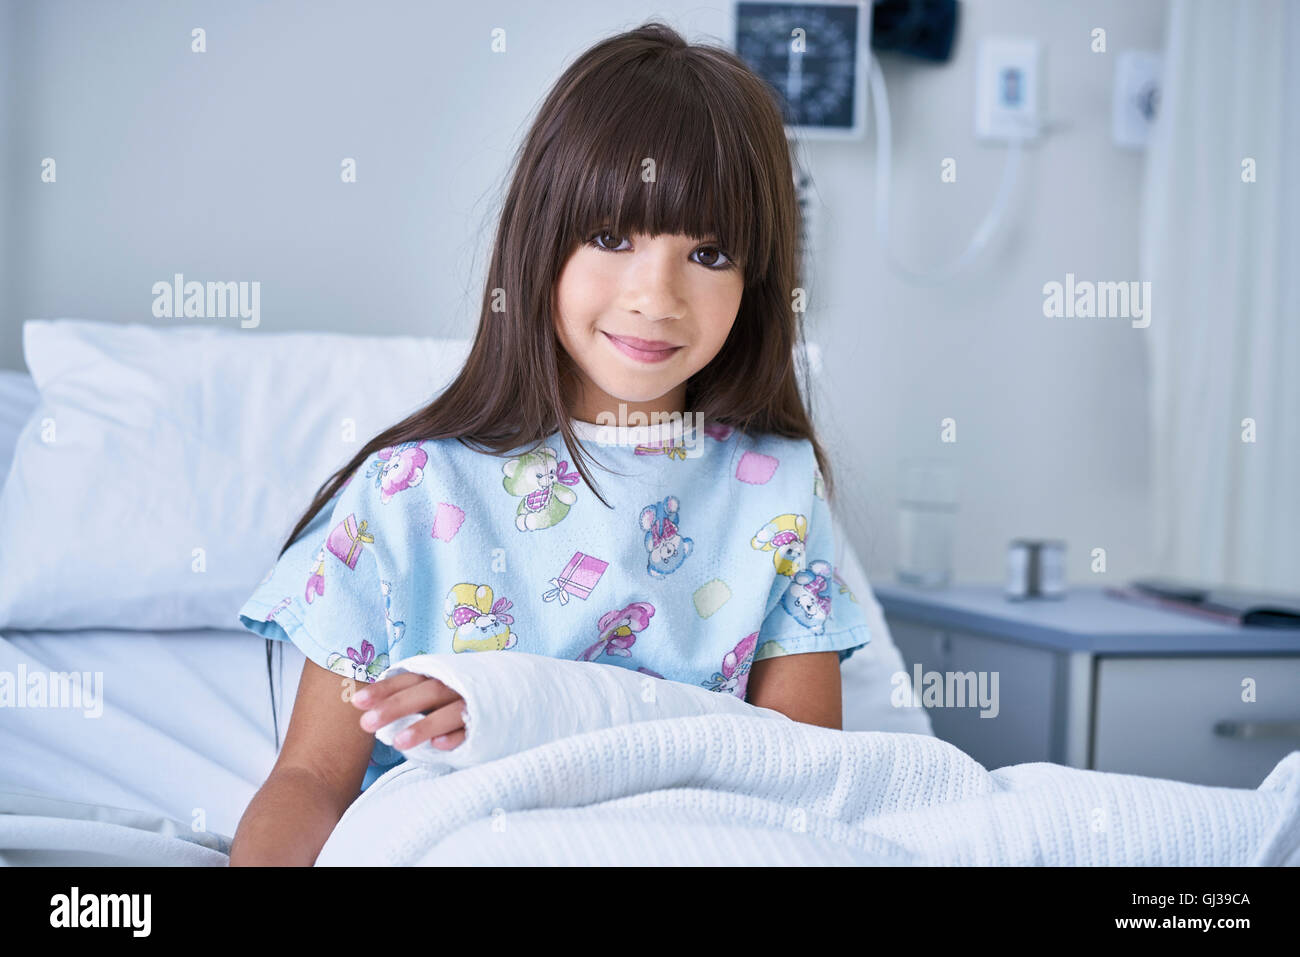 Portrait of girl patient with arm plaster cast in hospital children's ward Stock Photo